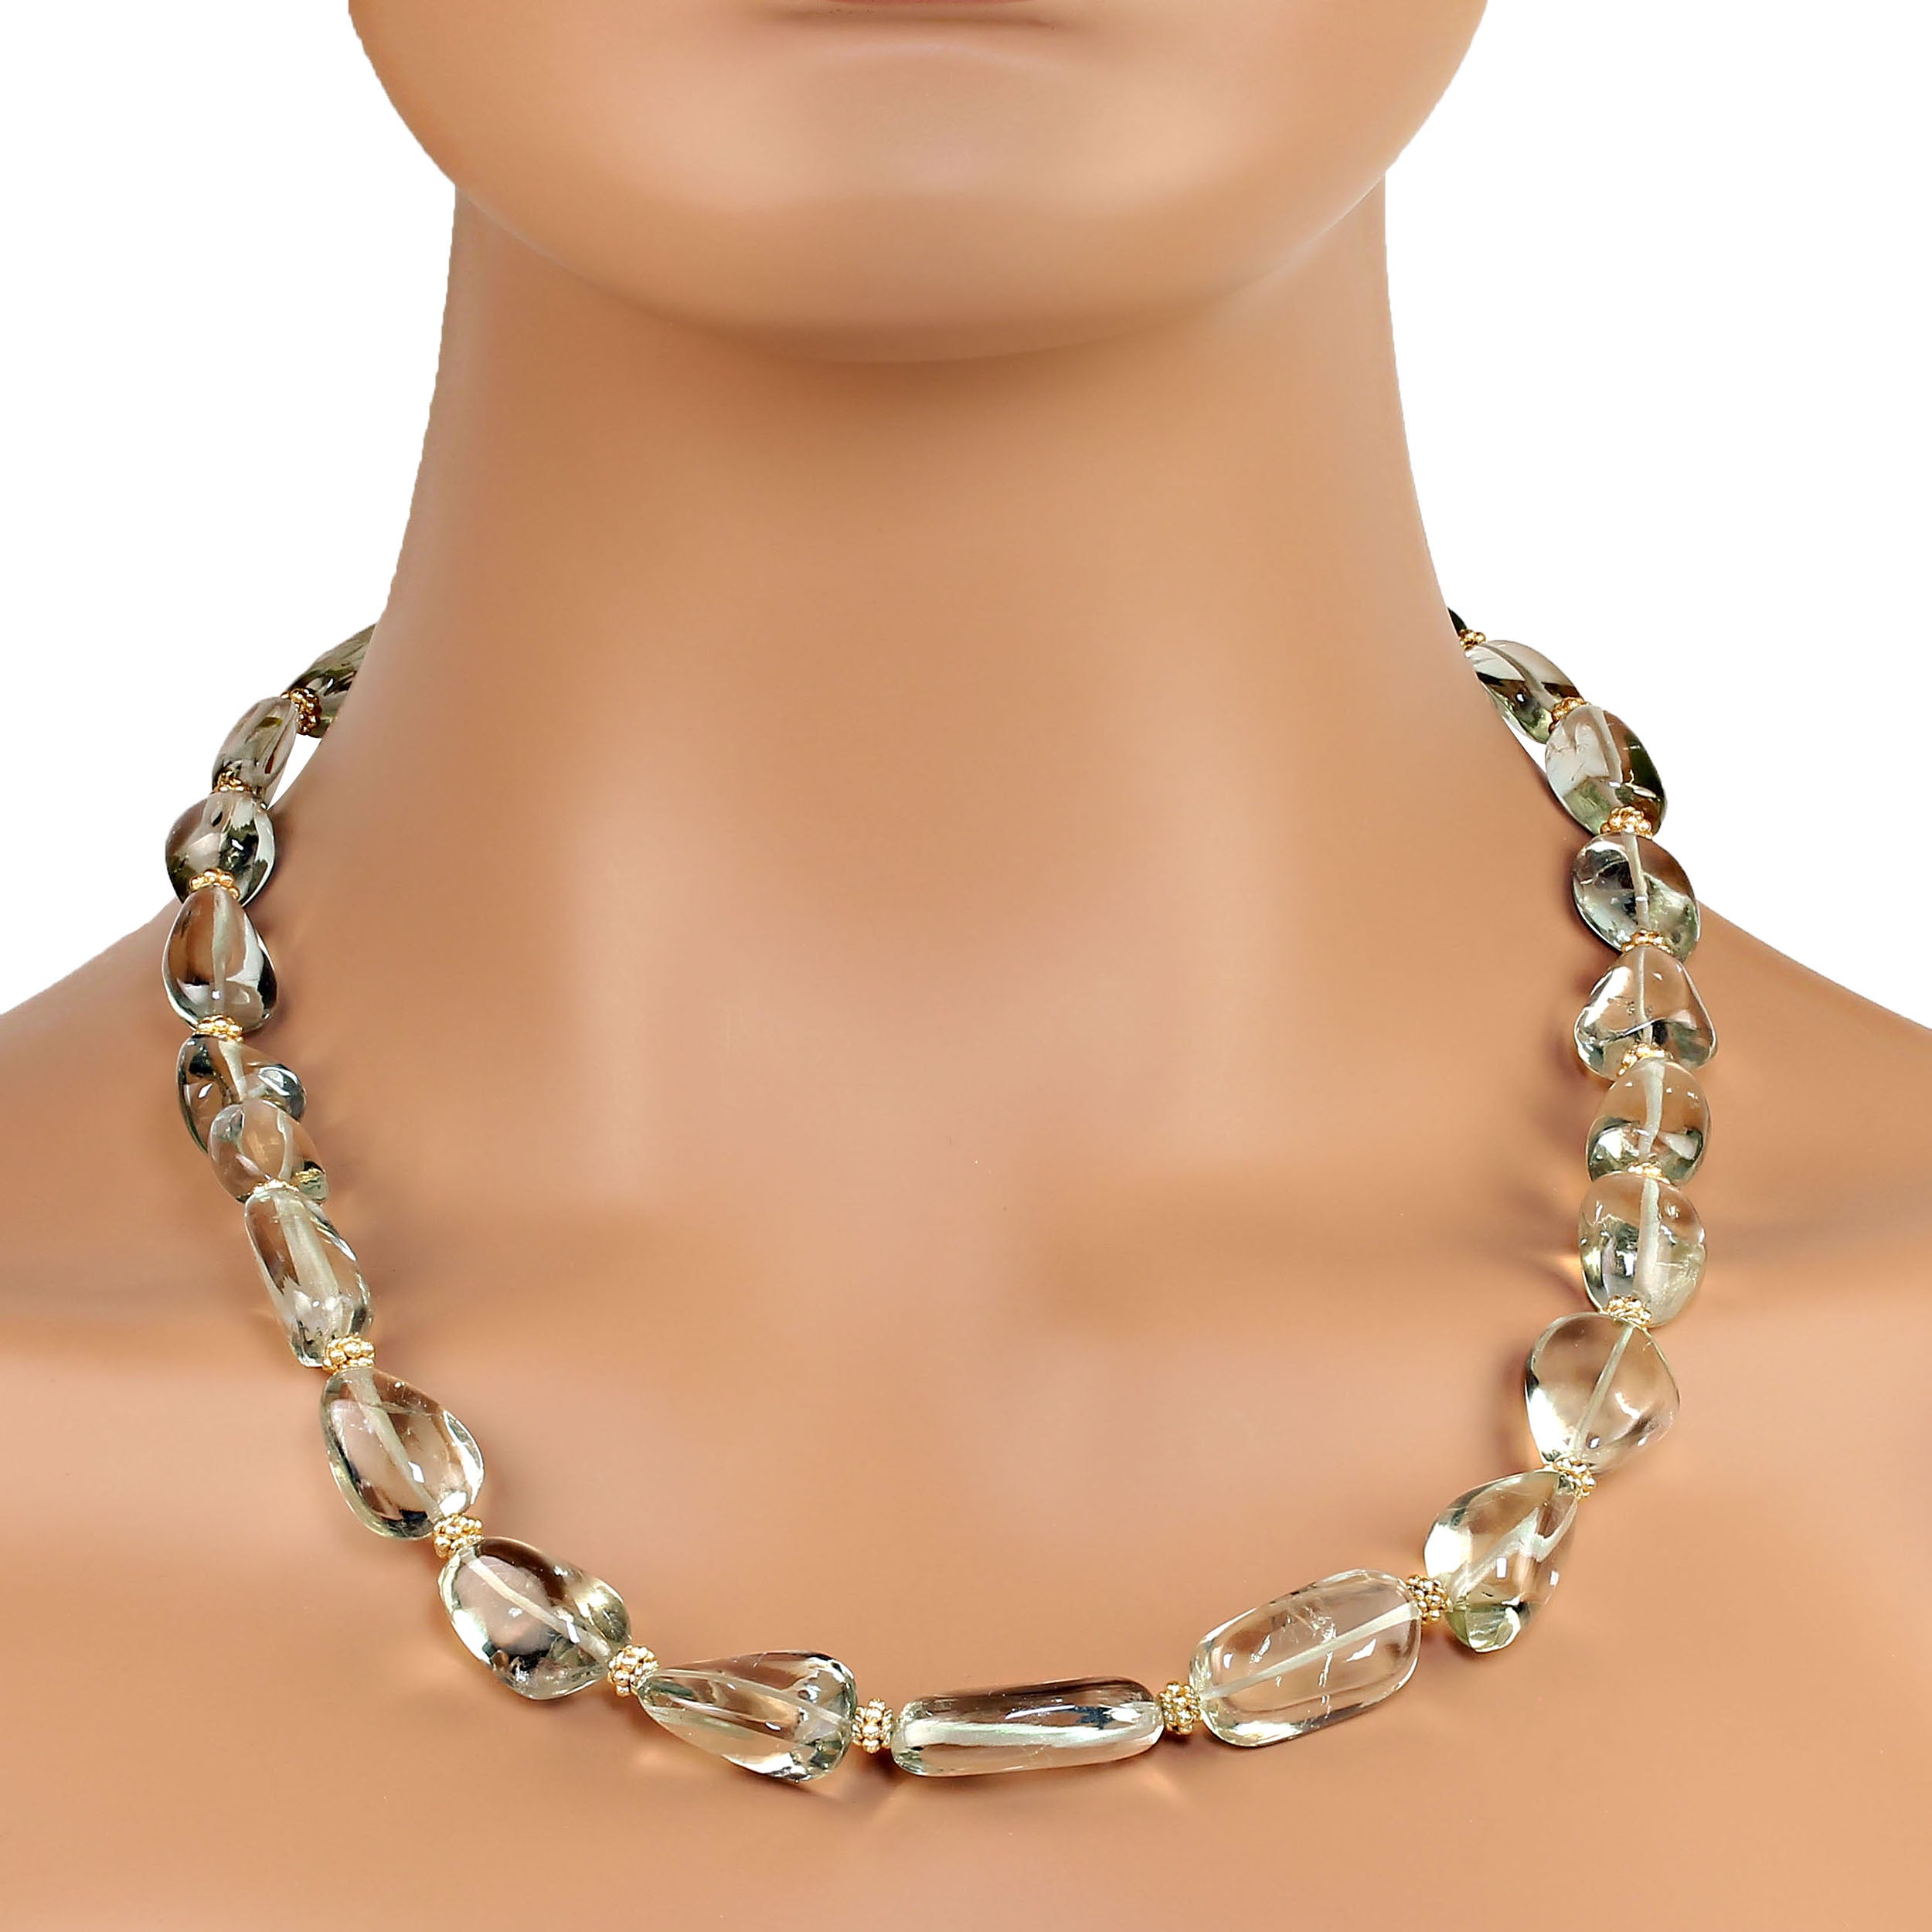 AJD Elegant 22 Inch Praziolite Graduated necklace with goldy accents  Great Gift For Sale